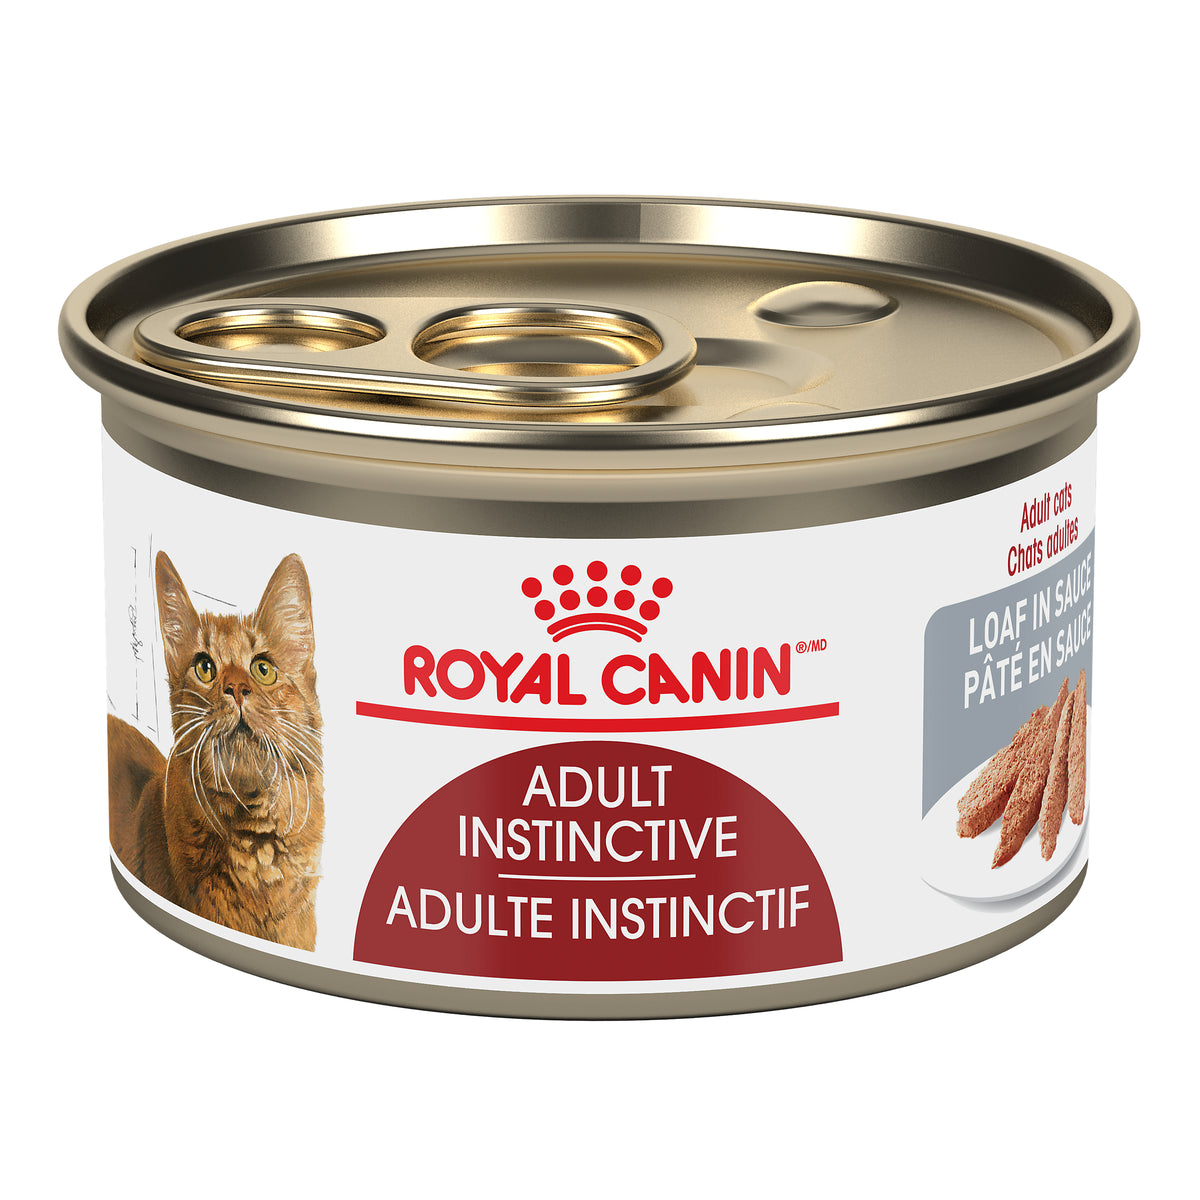 Royal Canin Adult Instinctive (Loaf in Sauce) - Wet Canned cat food